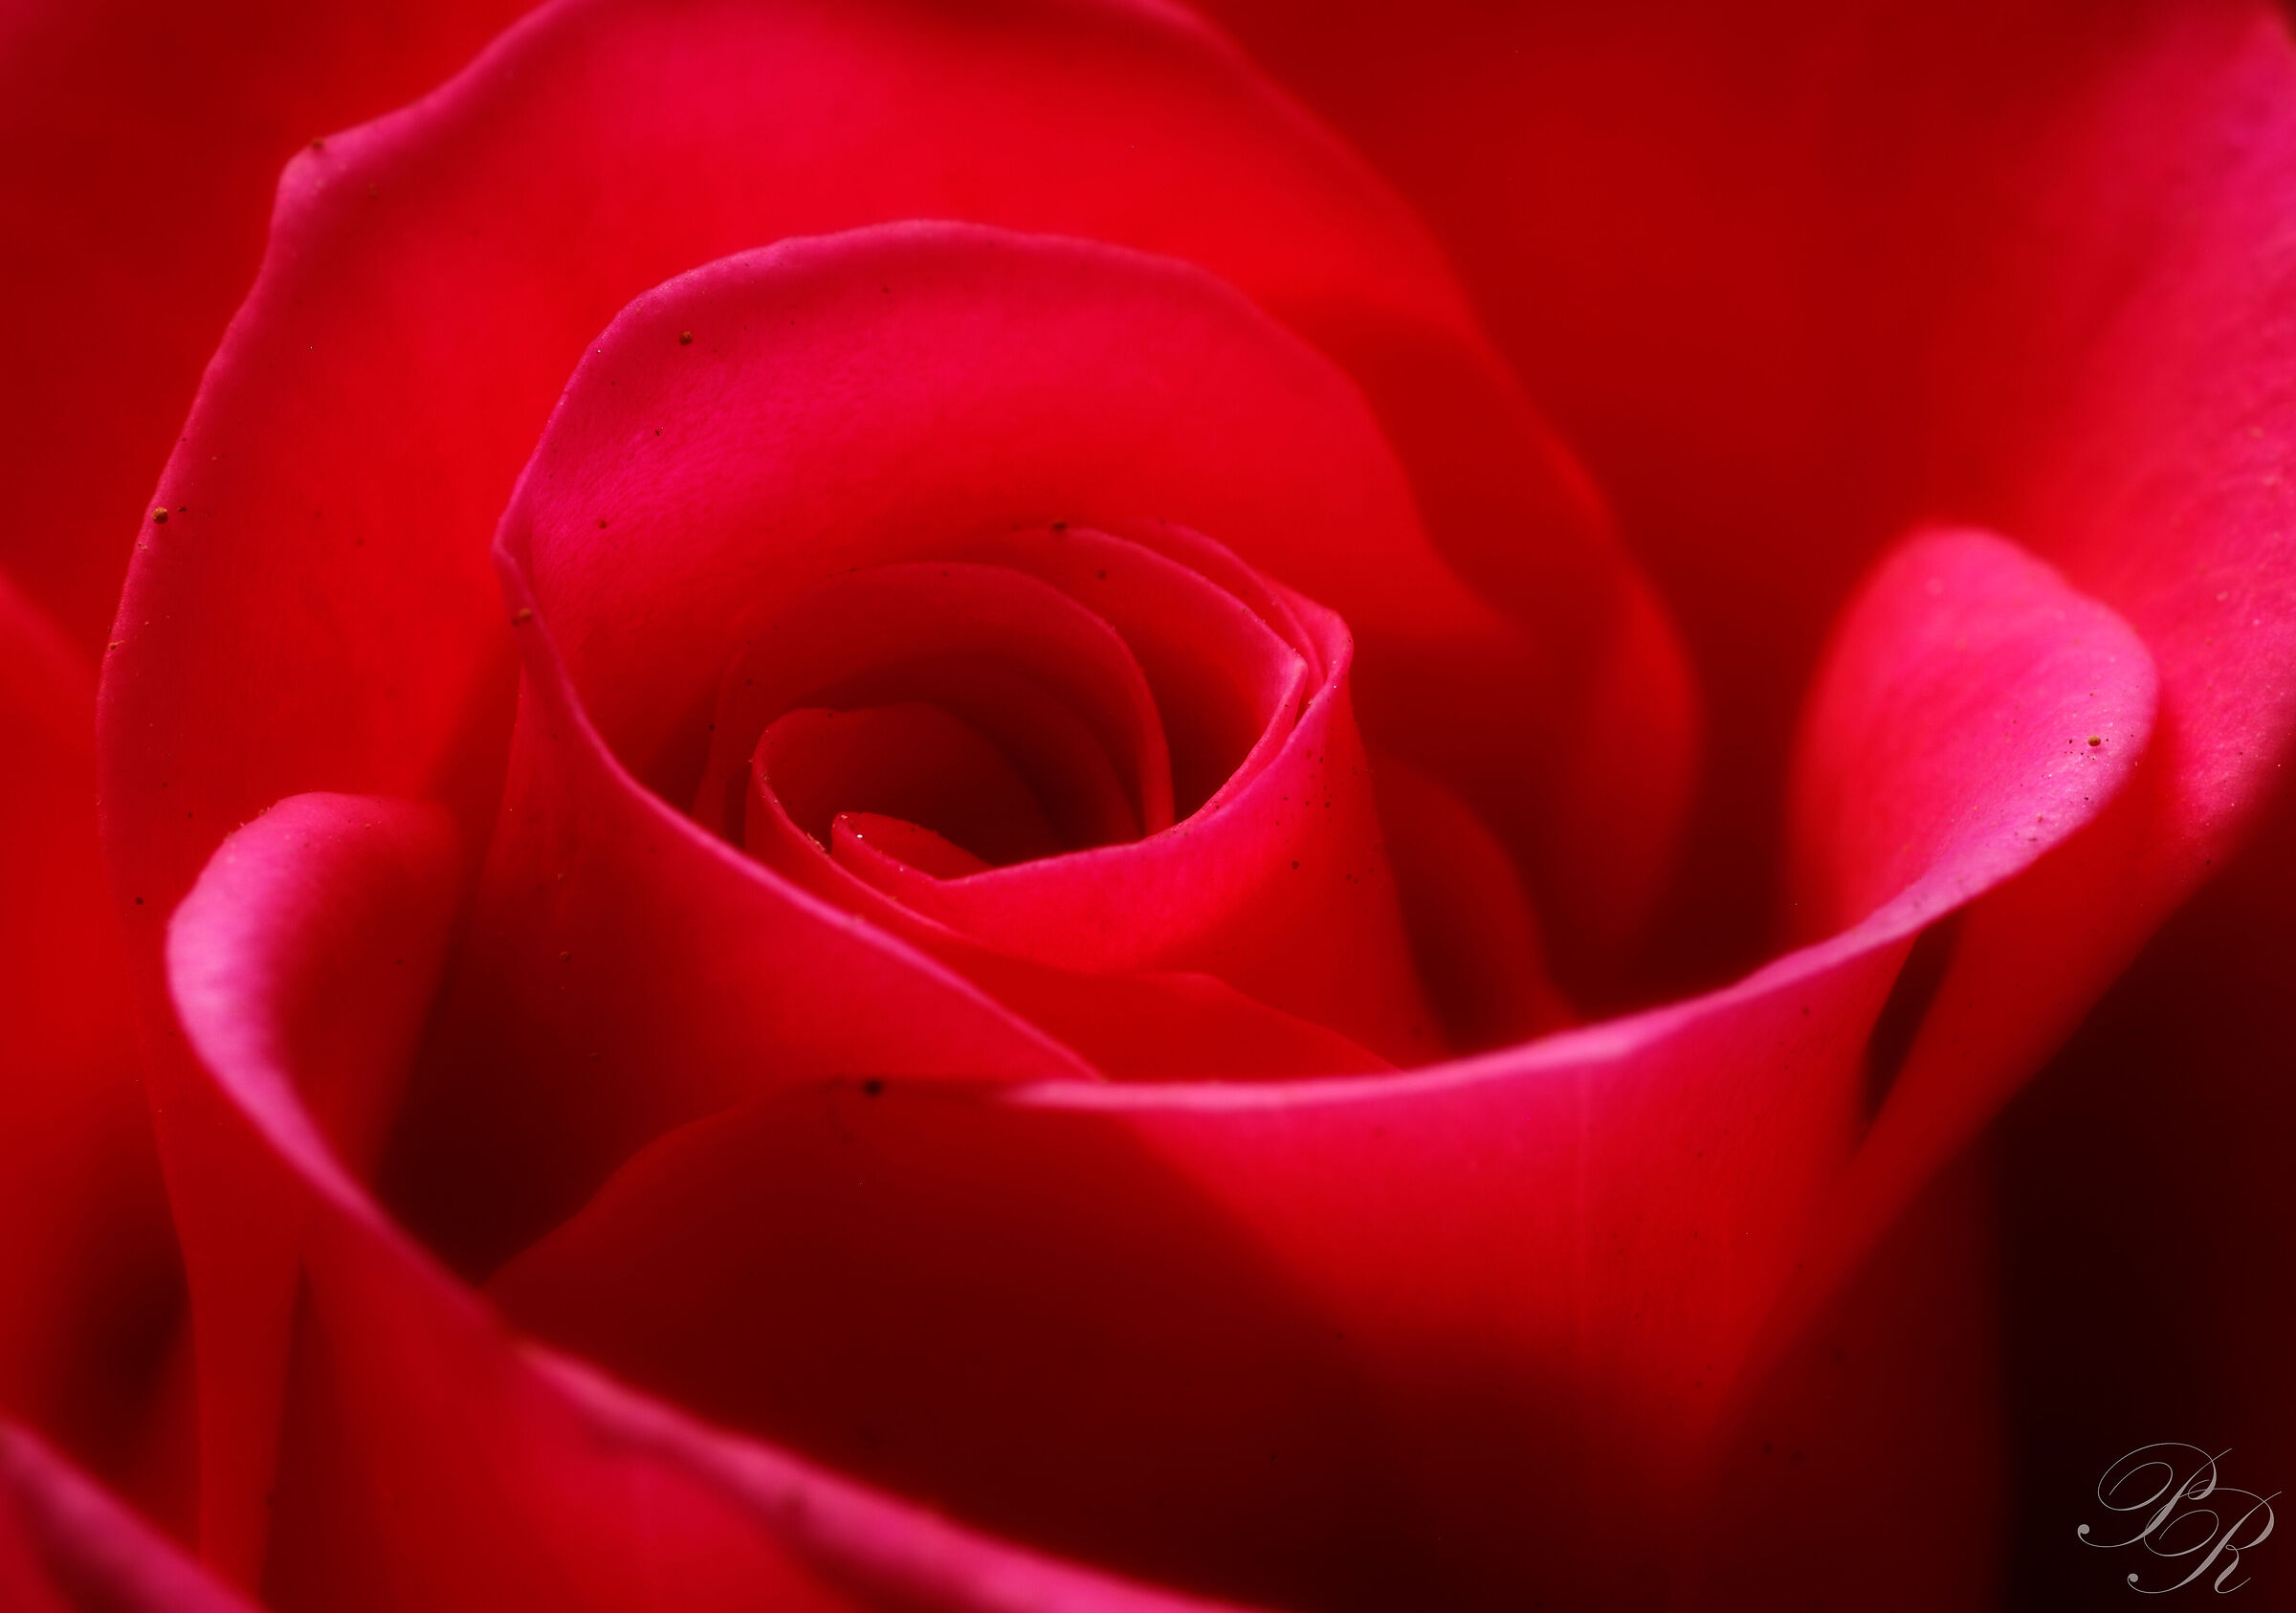 Immersed in a rose...